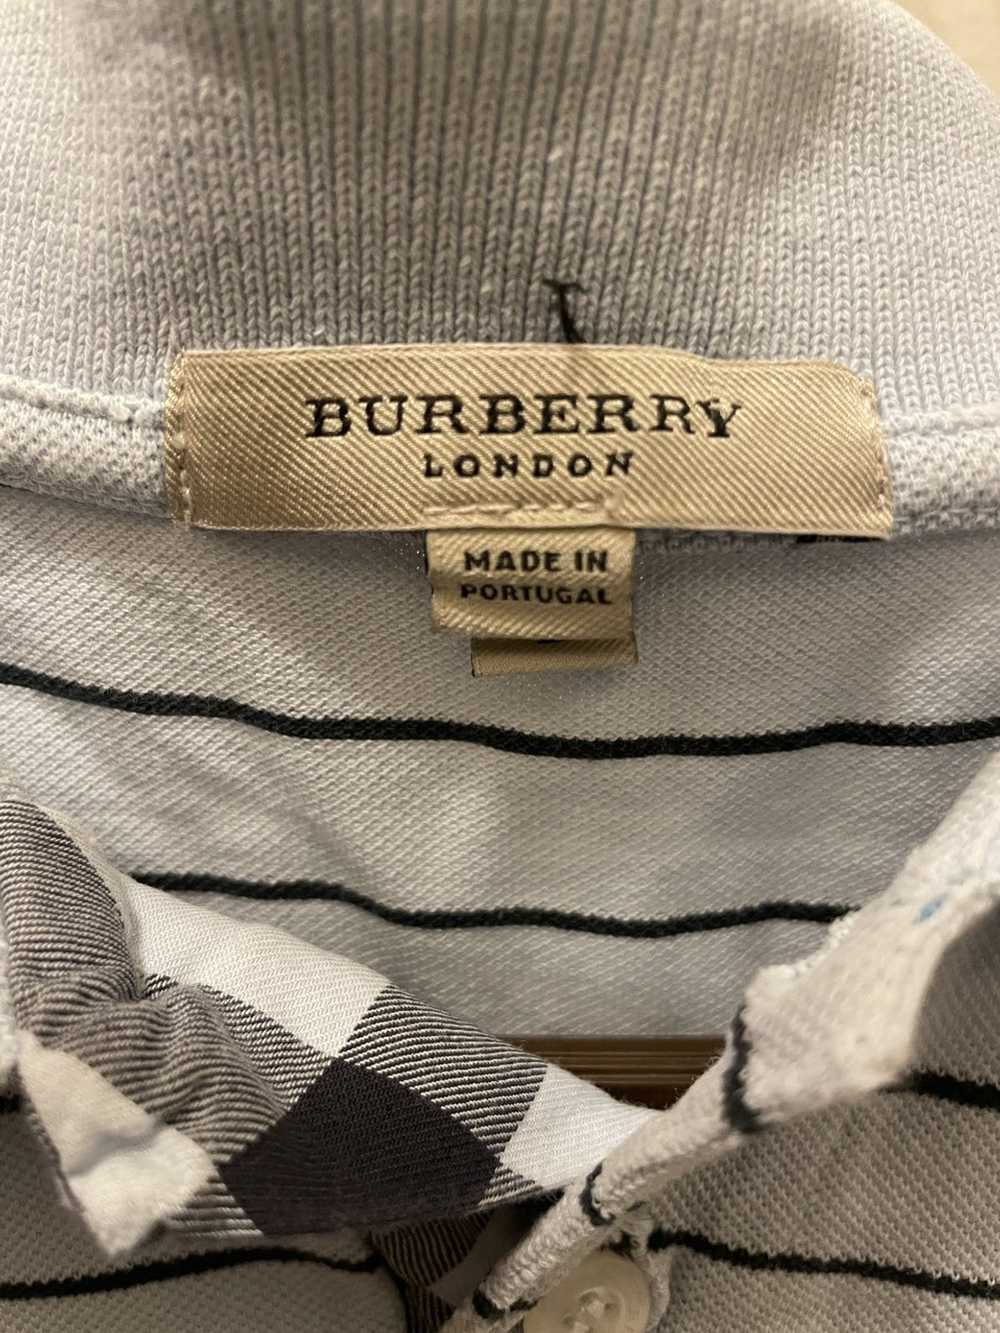 Burberry Vintage Burberry Short Sleeved Polo Shirt - image 3